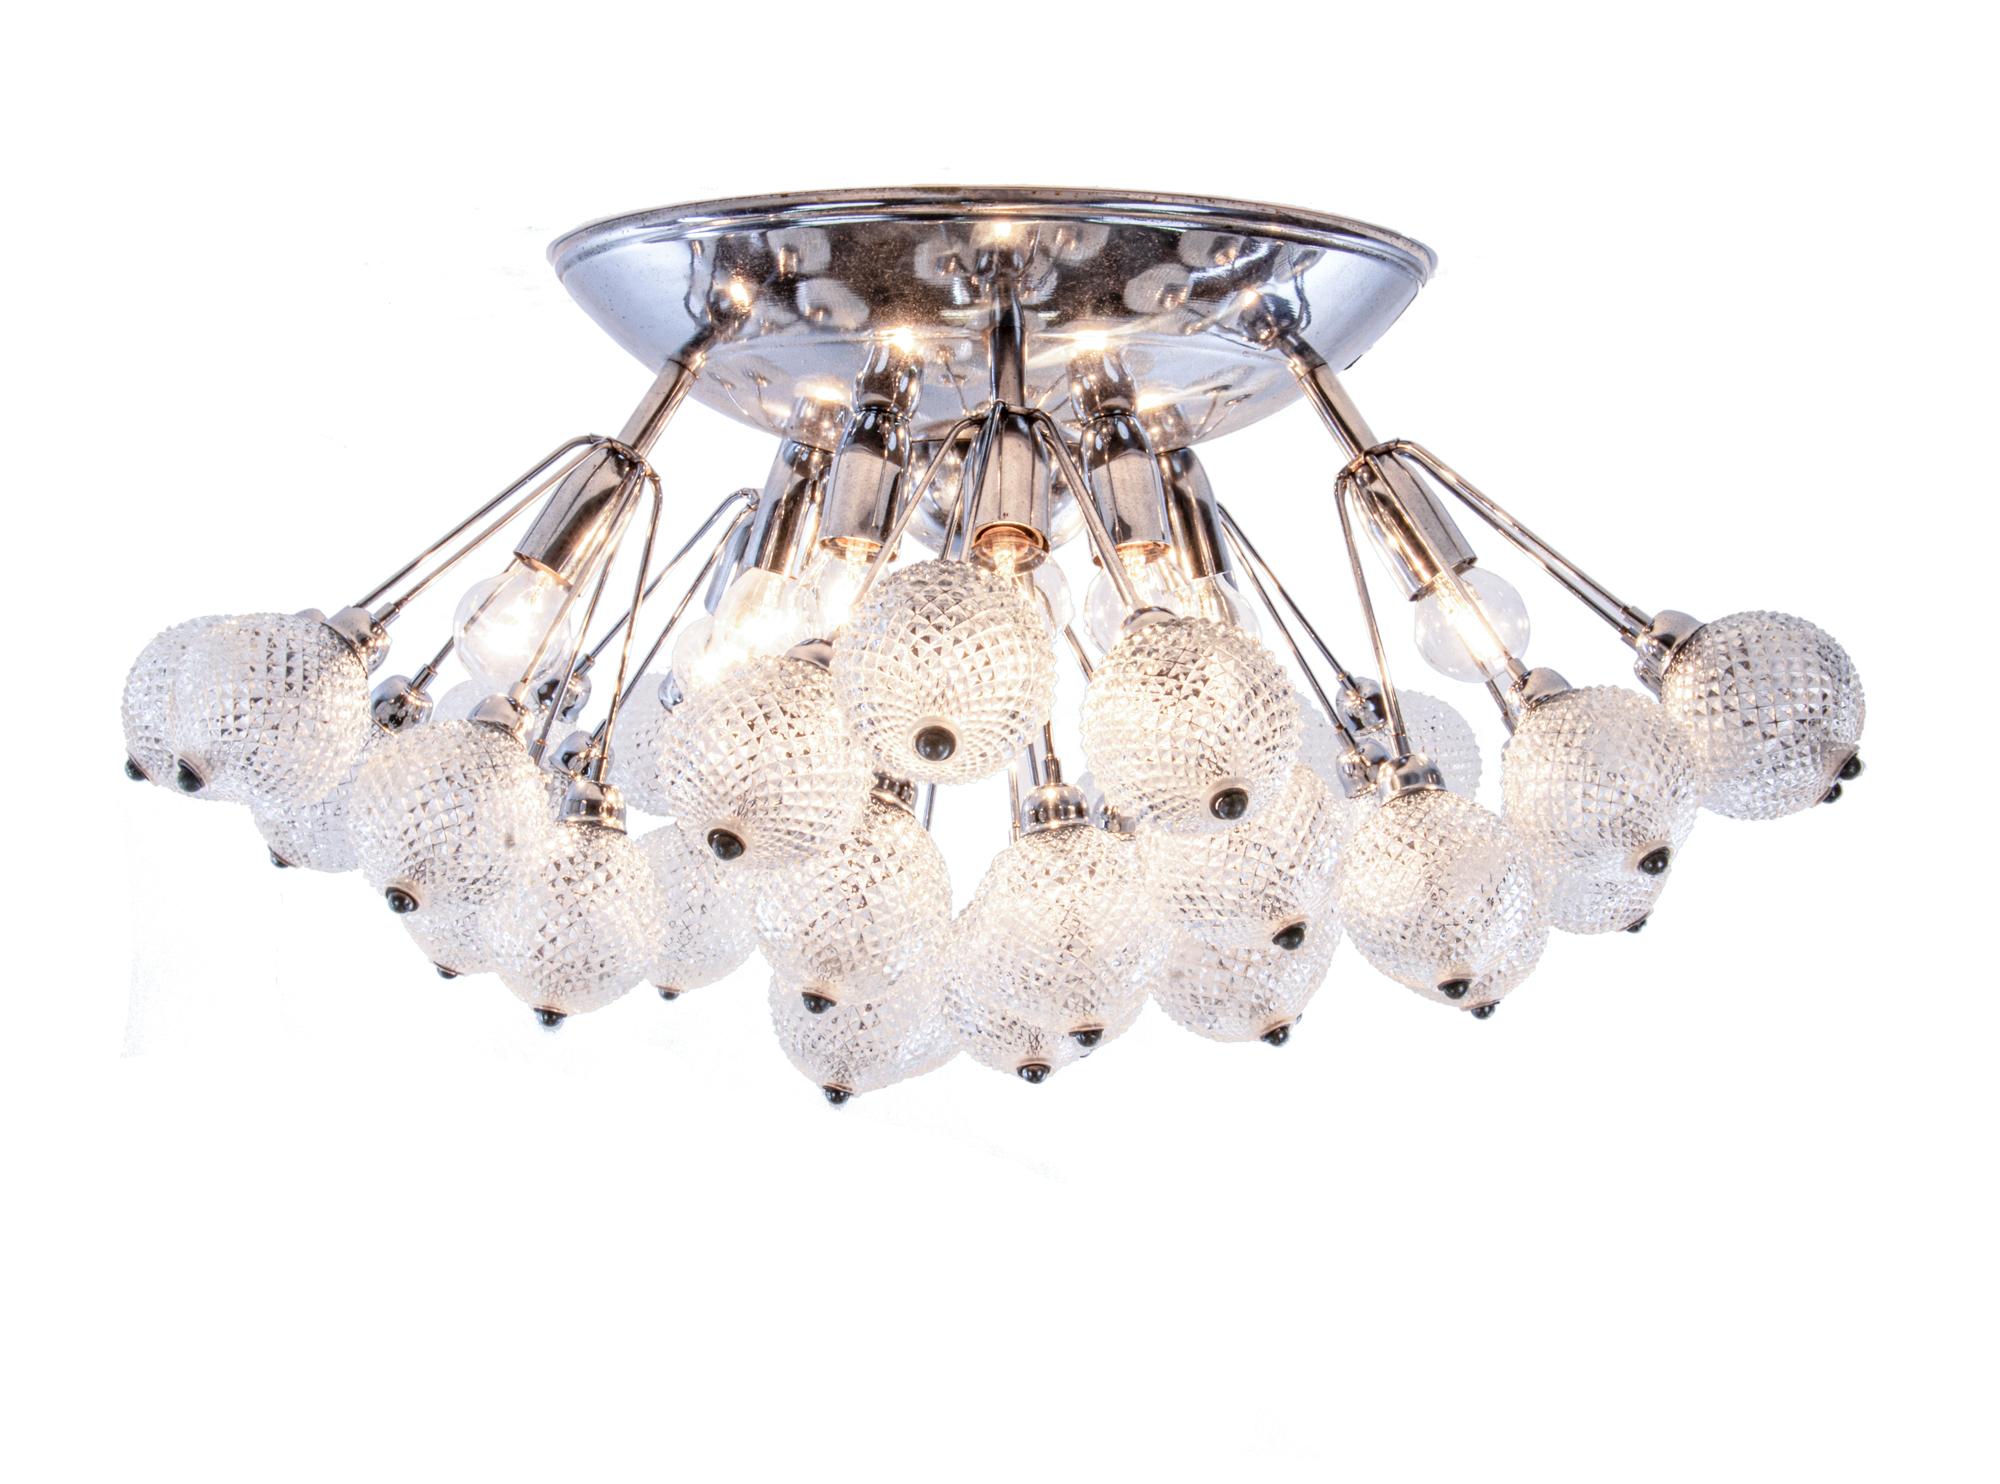 Elegant large starburst crystal glass and chrome flush mount chandelier made in Italy in the 1960s. The chandelier has a modernist look and thanks to strong illumination it offers a beautiful play of light. Chandelier illuminates beautifully and